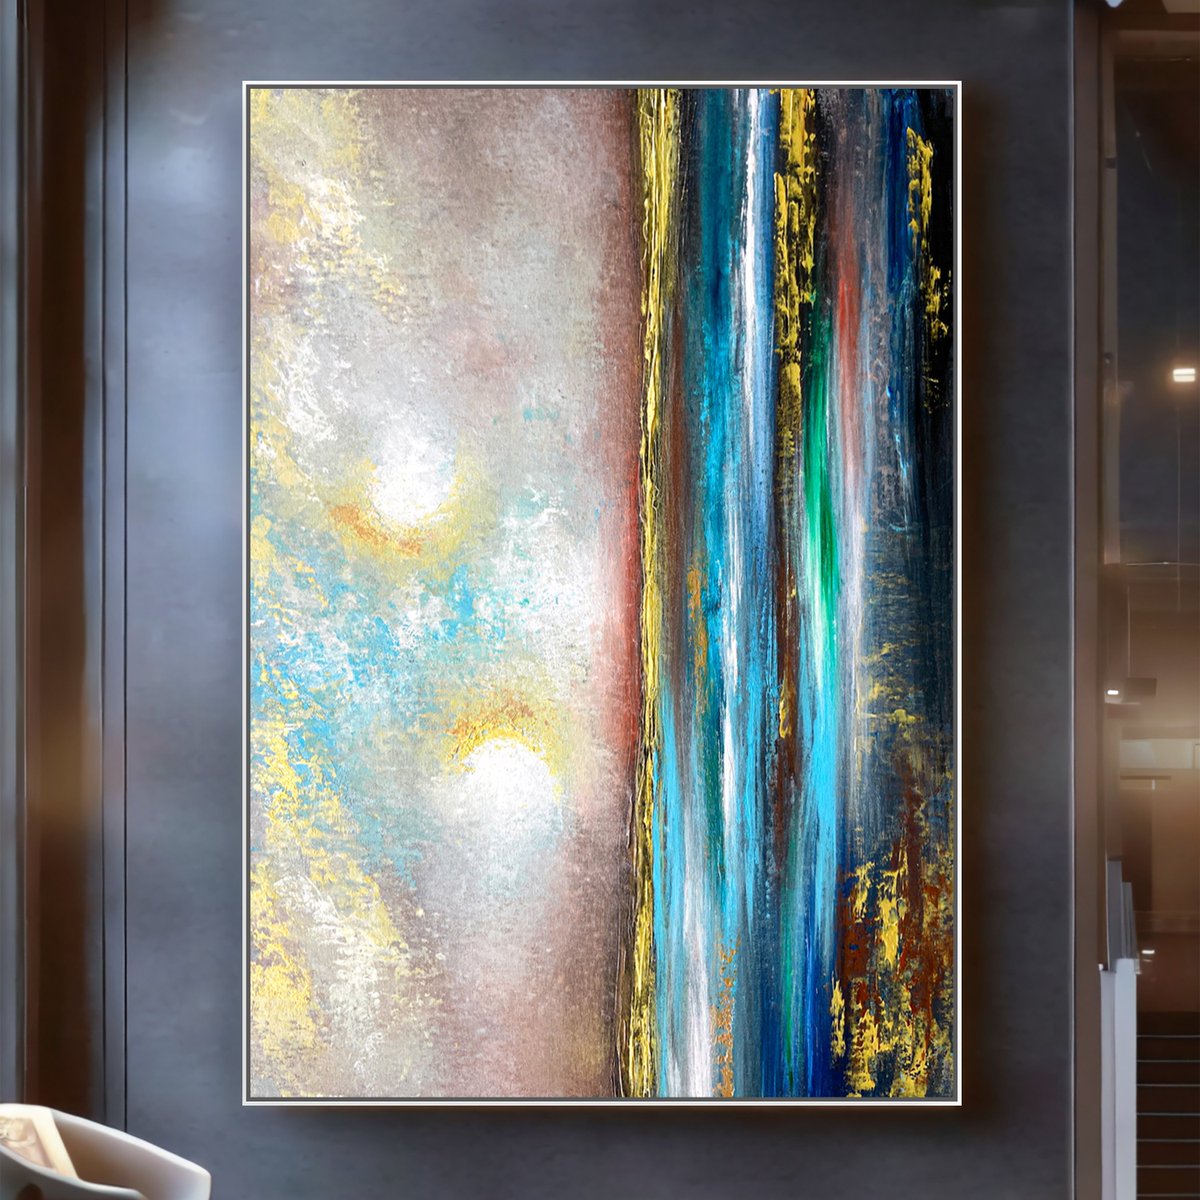 A large landscape-themed Gem abstract painting on canvas, adding a vibrant touch to your home wall decor
FREE Global Shipping Available, Purchase Here
krivaarthouse.etsy.com/uk/listing/159…

#landscapeart #abstractpainting #brightdecor #homewalldecor #wallart #abstractpainting #ArtistOnTwitter